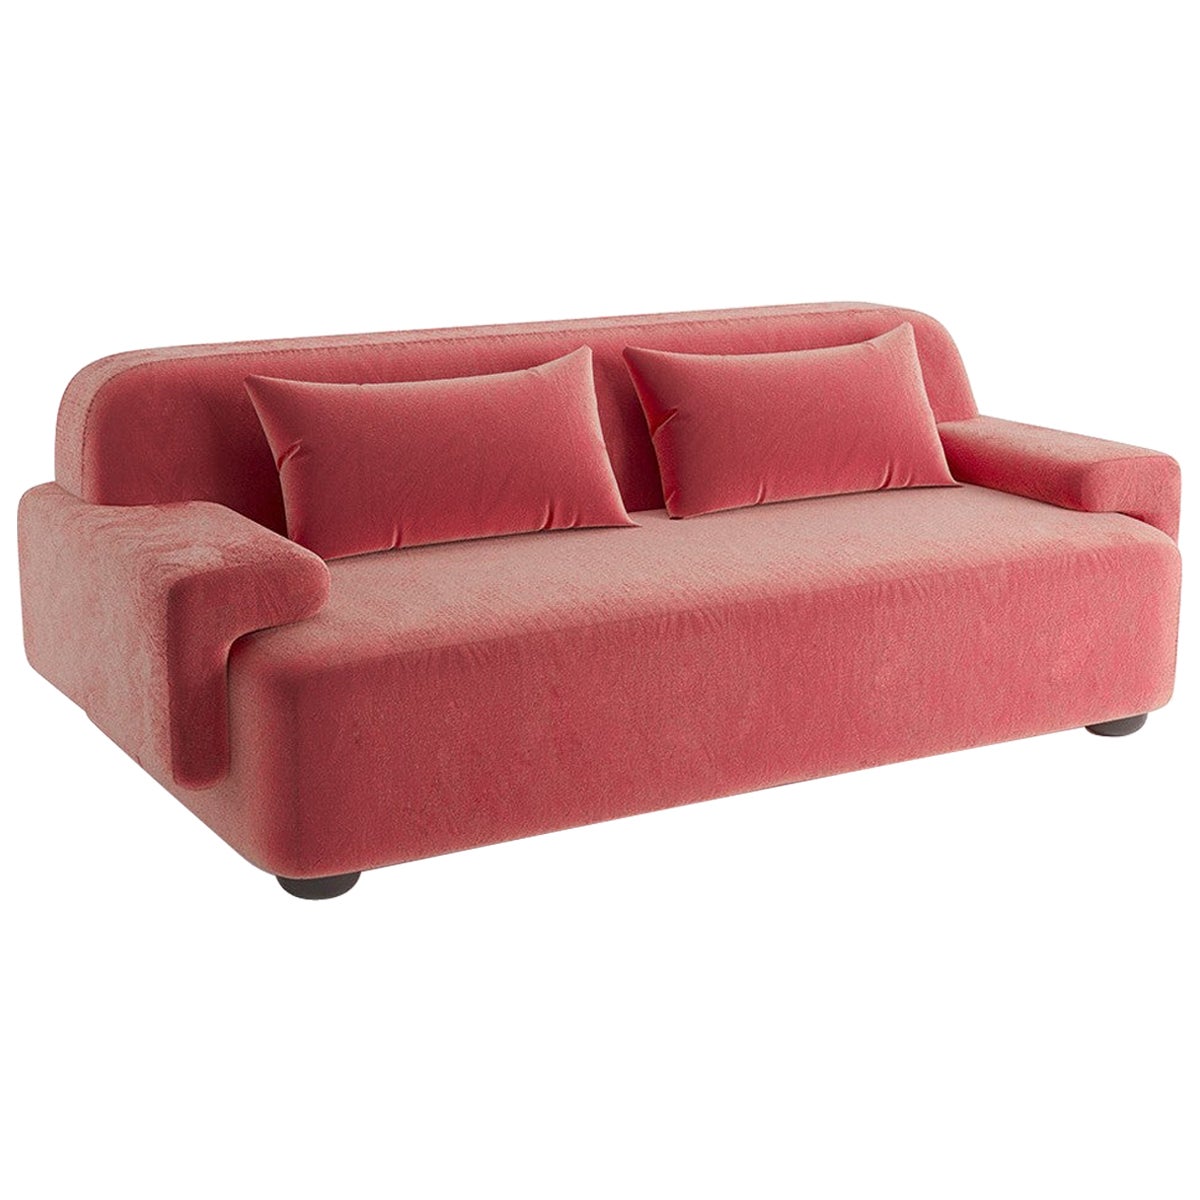 Popus Editions Lena 4 Seater Sofa in Pink Como Velvet Upholstery